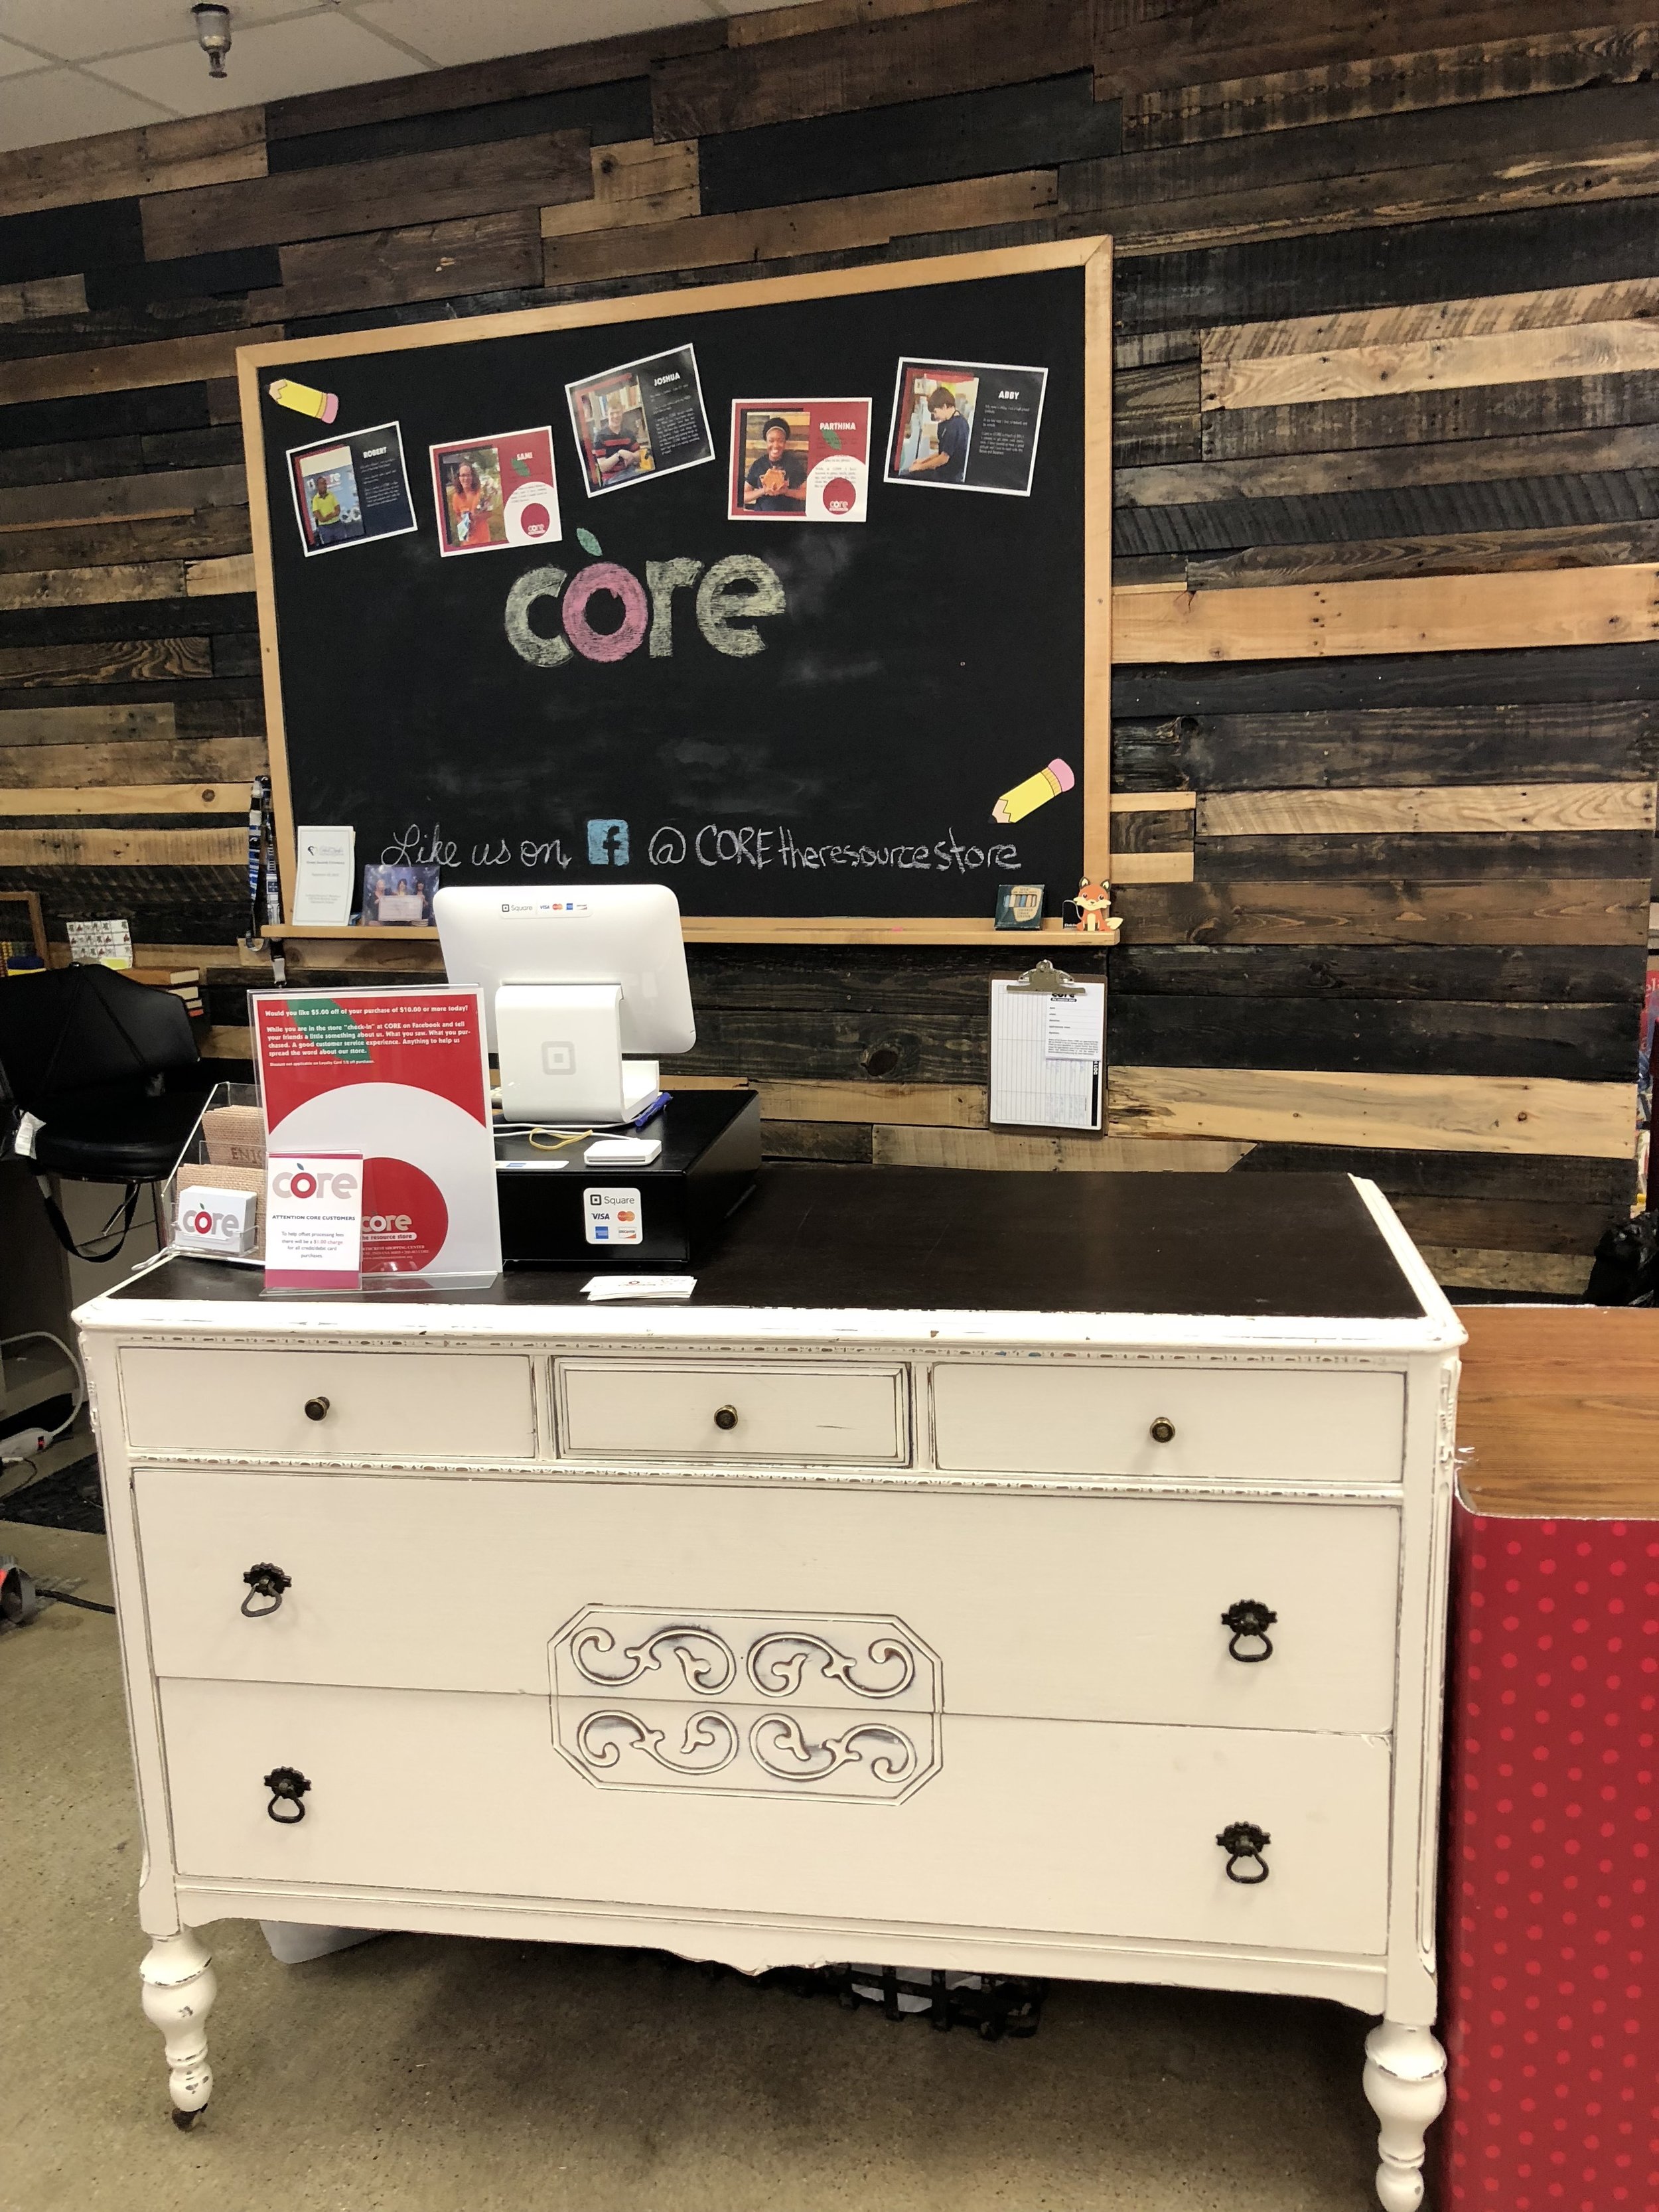 Core The Resource Store Fort Wayne In